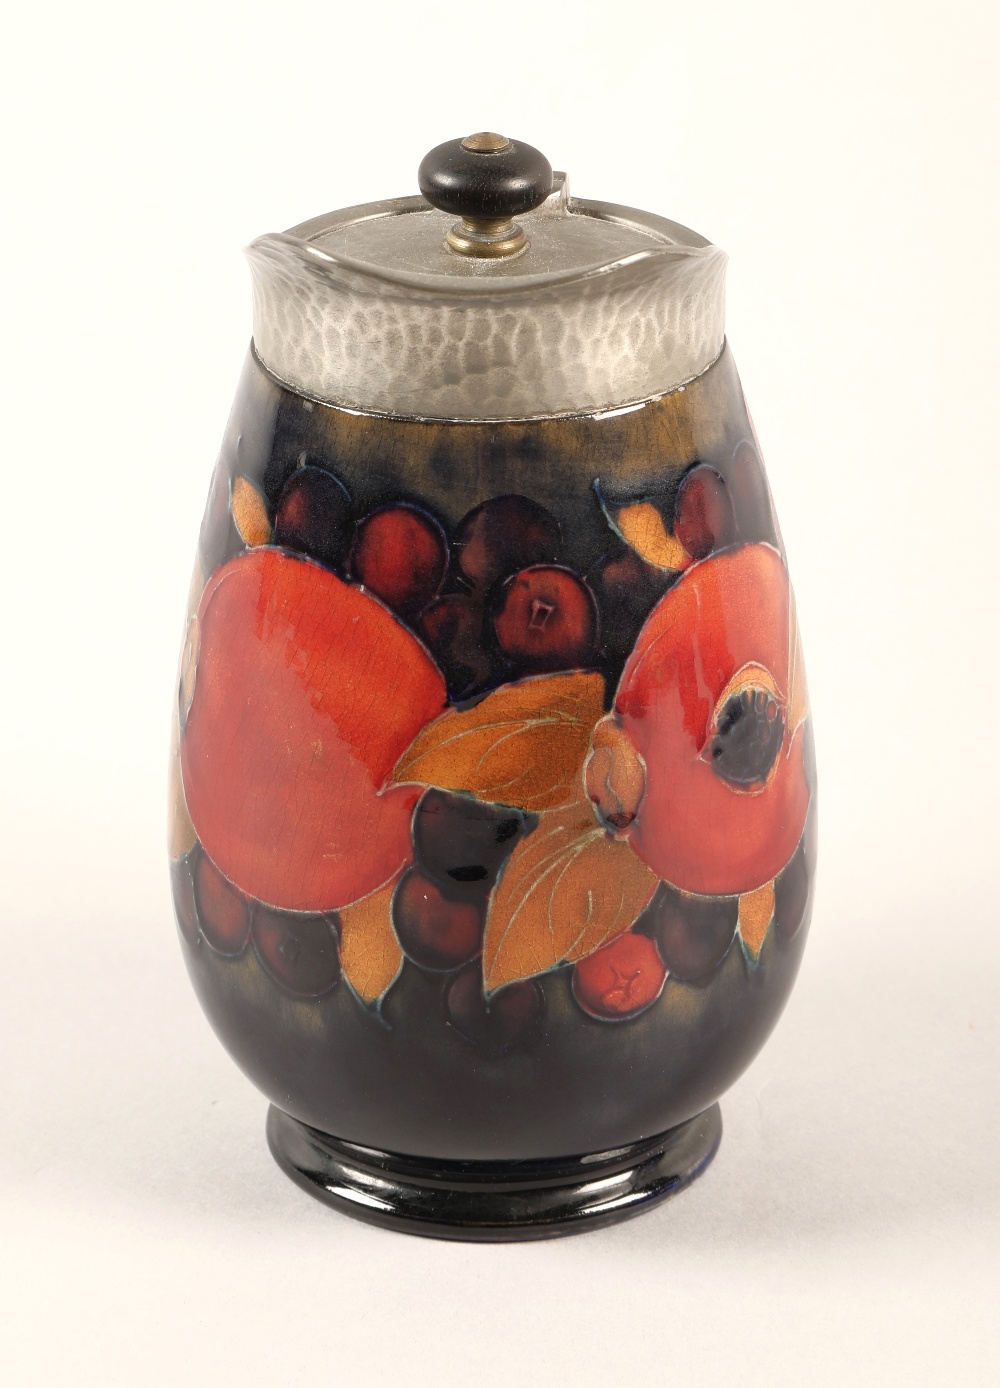 Moorcroft pottery Tudric pewter three piece tea service, pomegranate pattern designed by William - Image 5 of 22